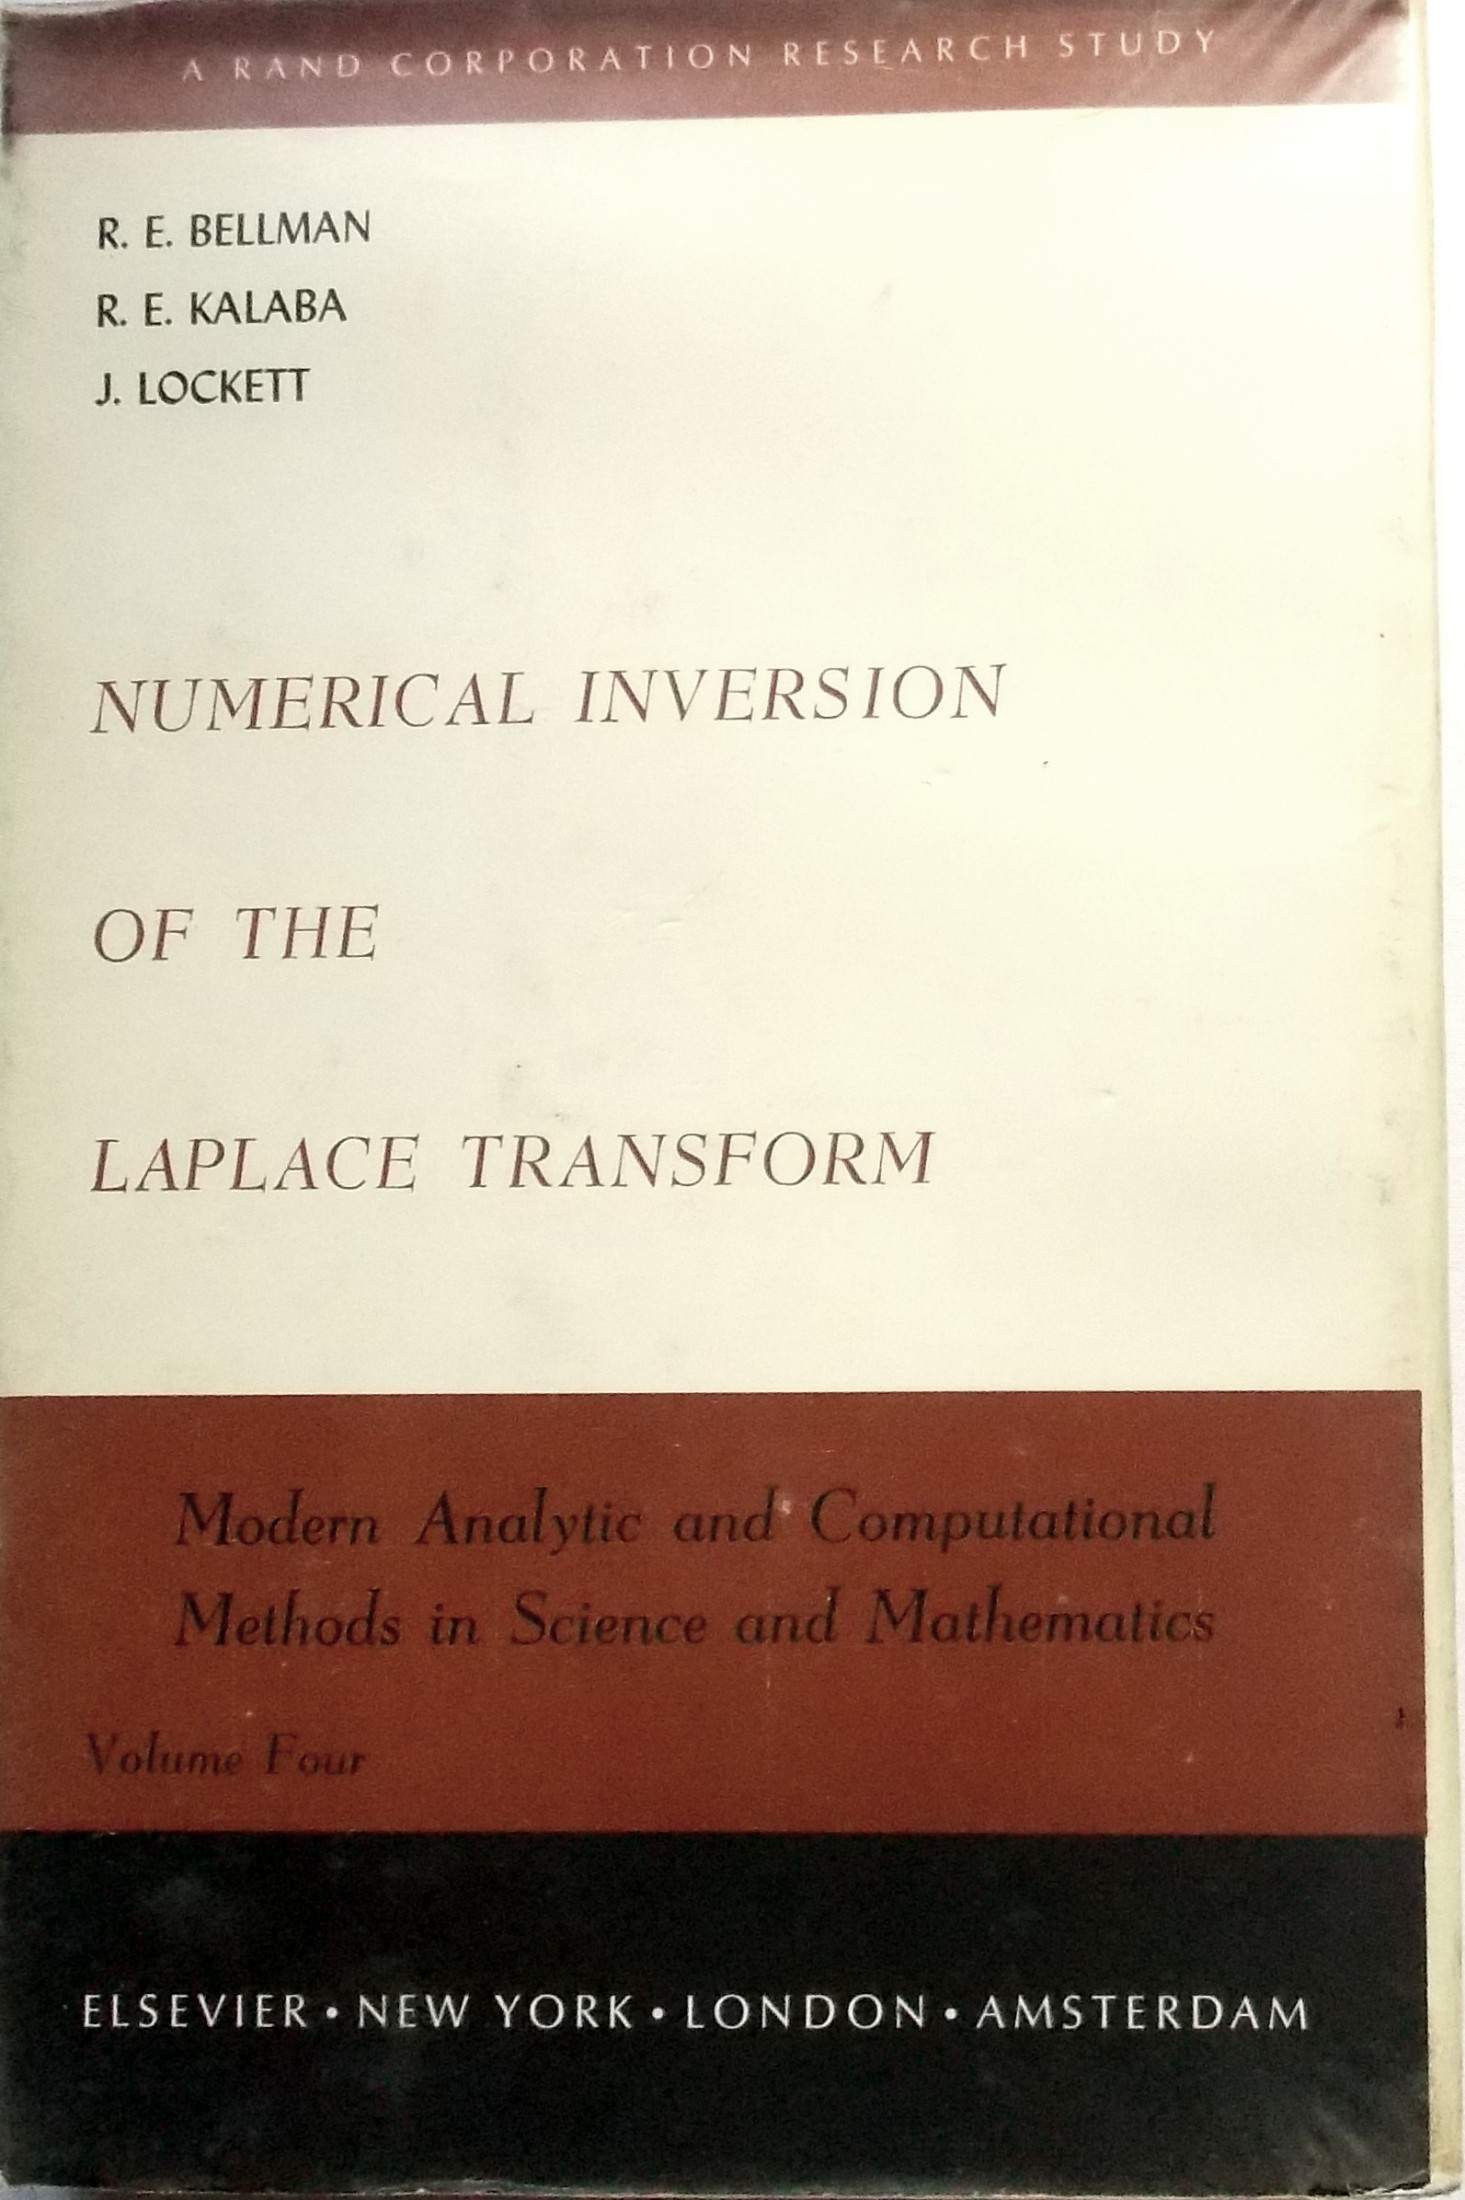 Numerical Inversion of the Laplace Transform: Applications to Biology, Economics, Engineering, and Physics,